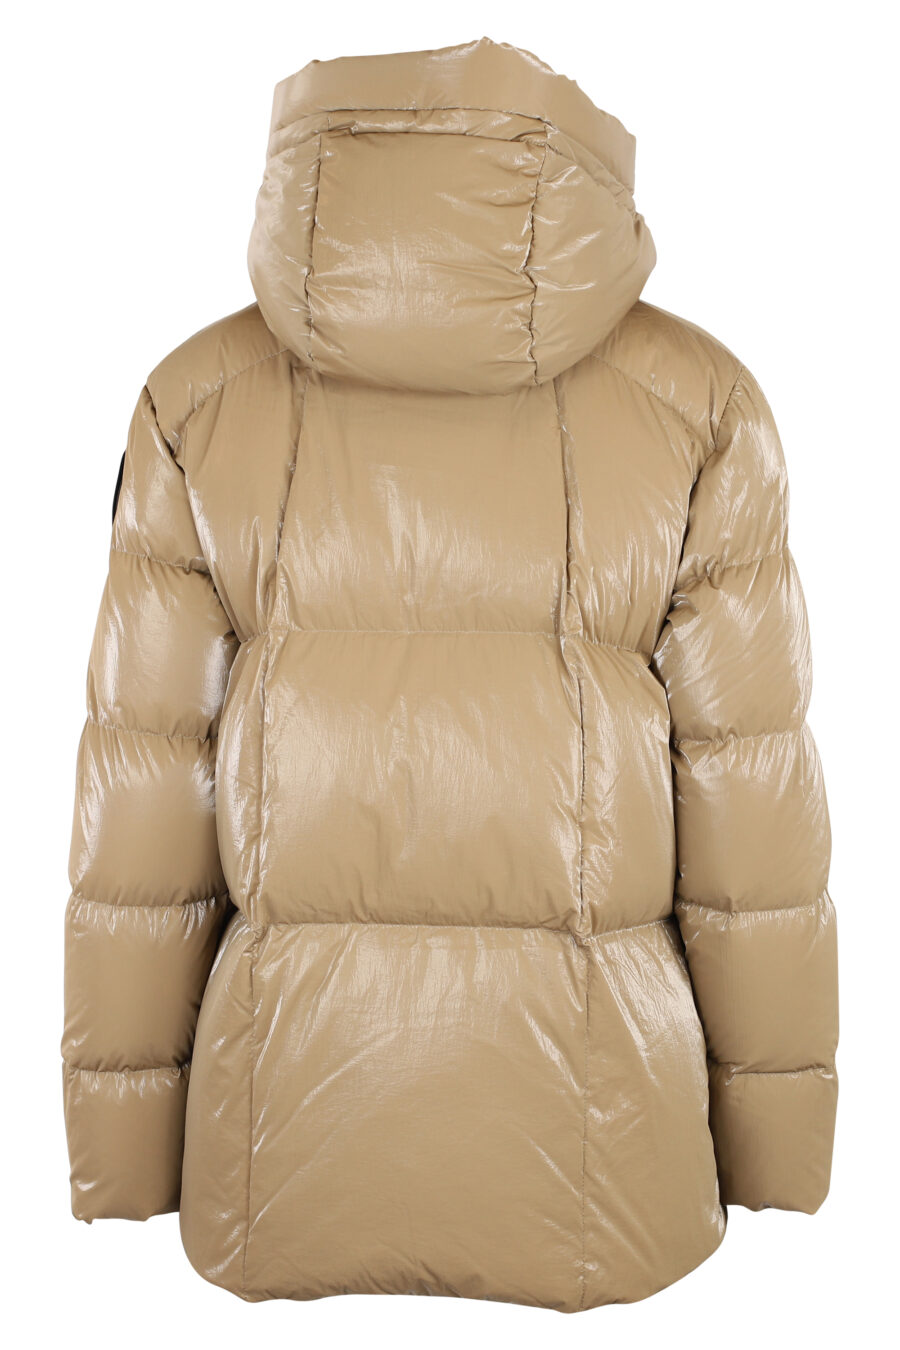 Brown quilted hooded jacket - IMG 5466